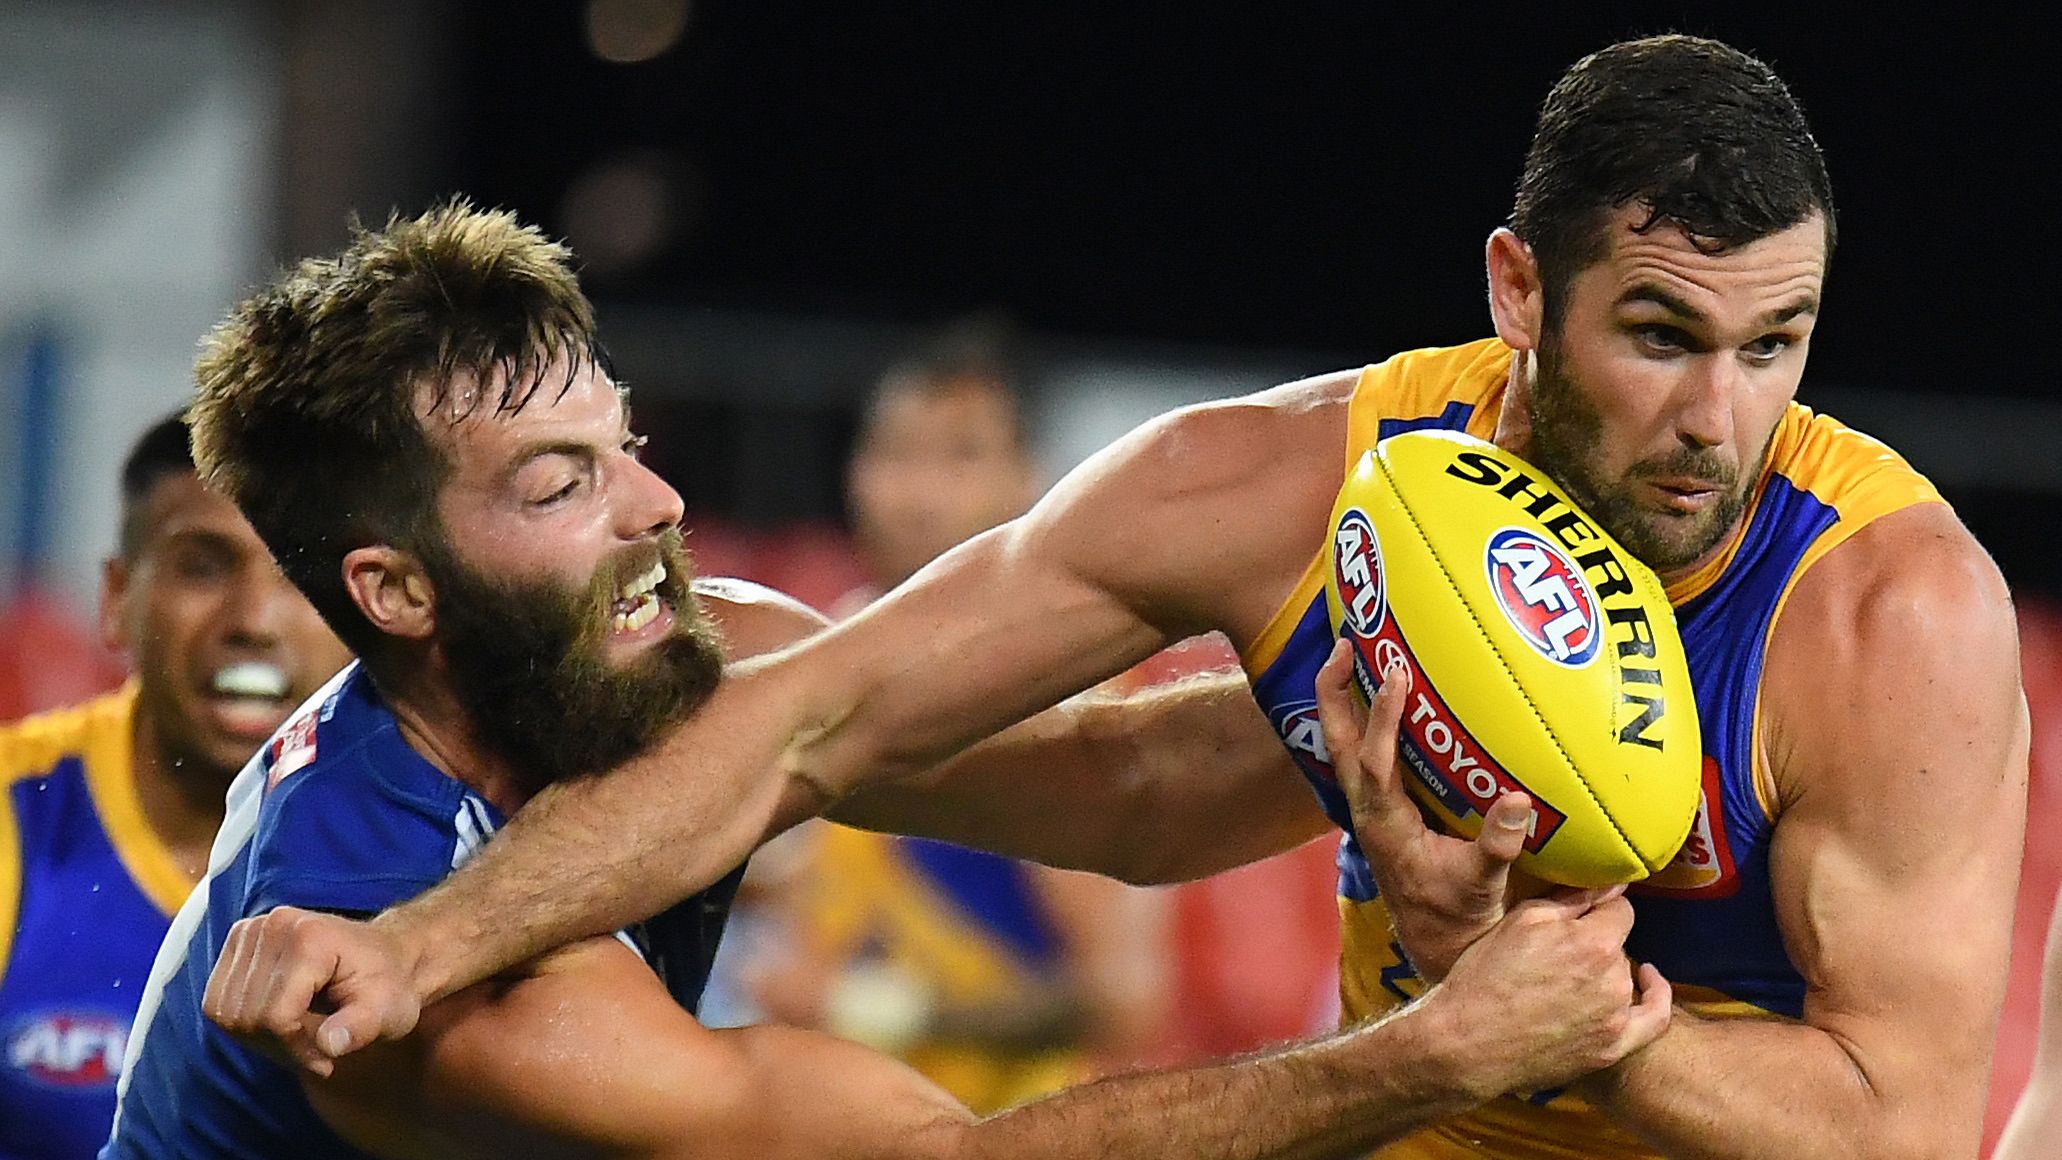 Jack Darling returns to Eagles training, now complies with AFL's COVID-19 rules